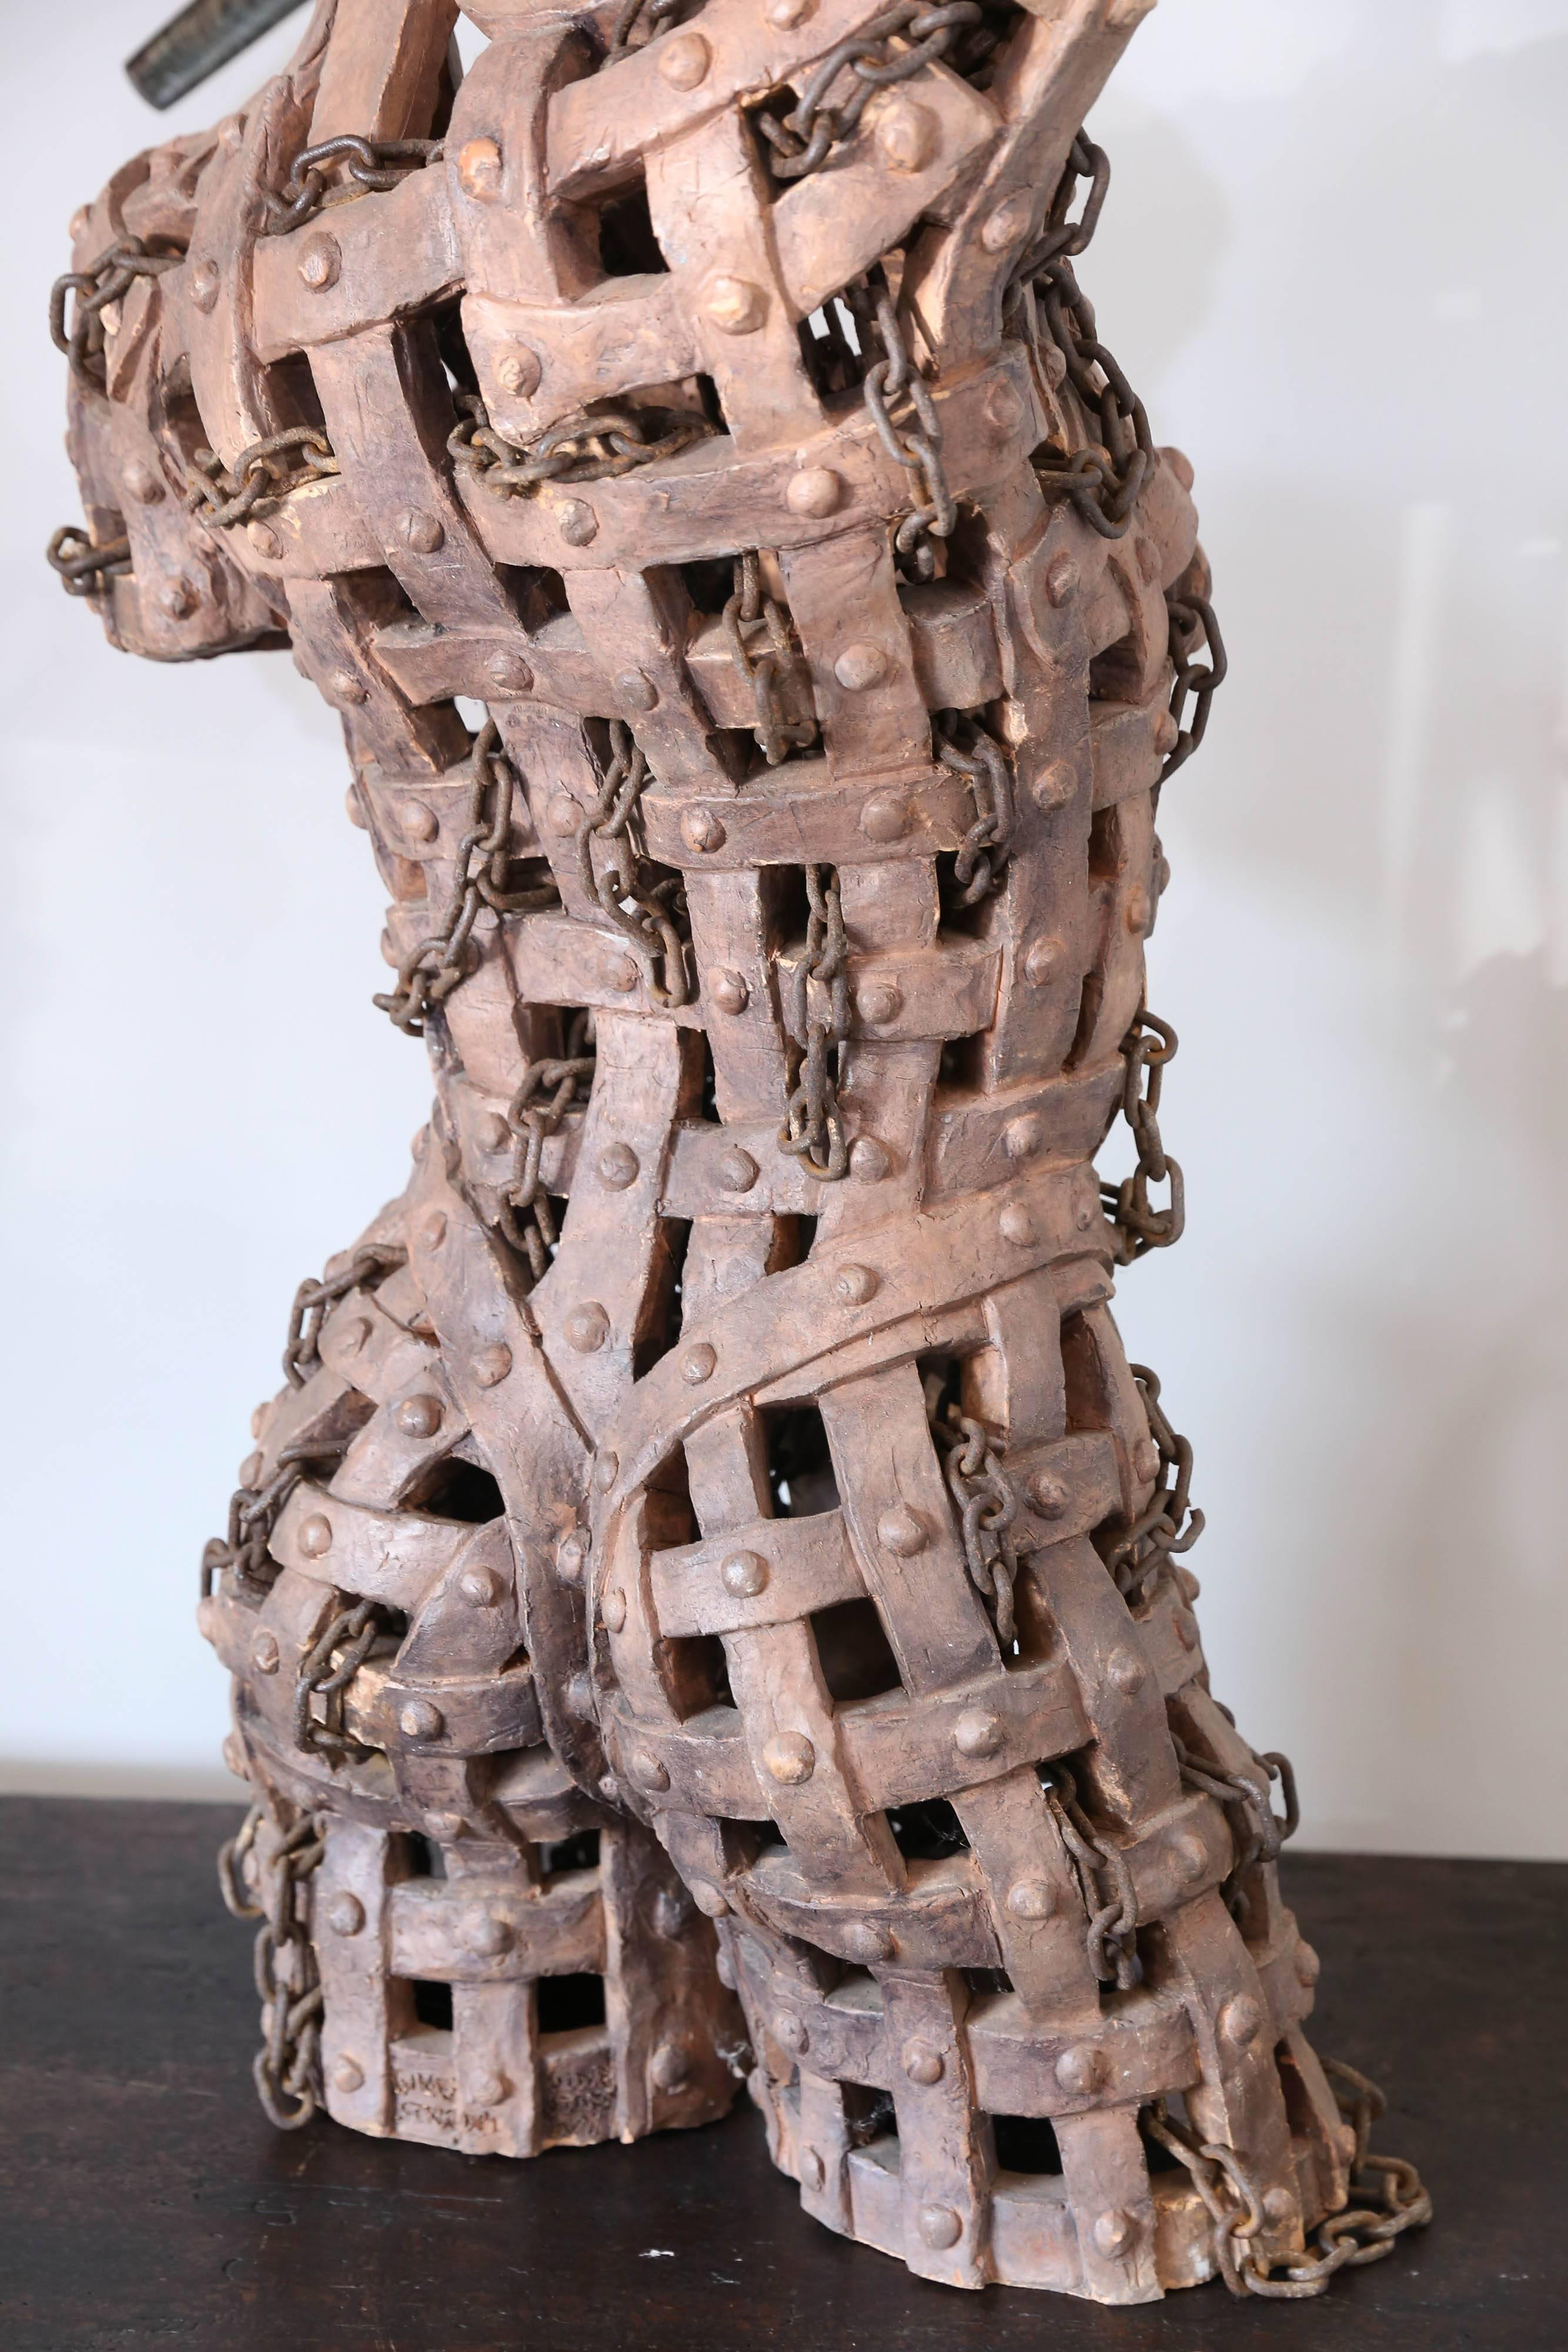 Tuscan Terracotta and Chain Female Sculpture by Italian Artist G. Ginestroni 2